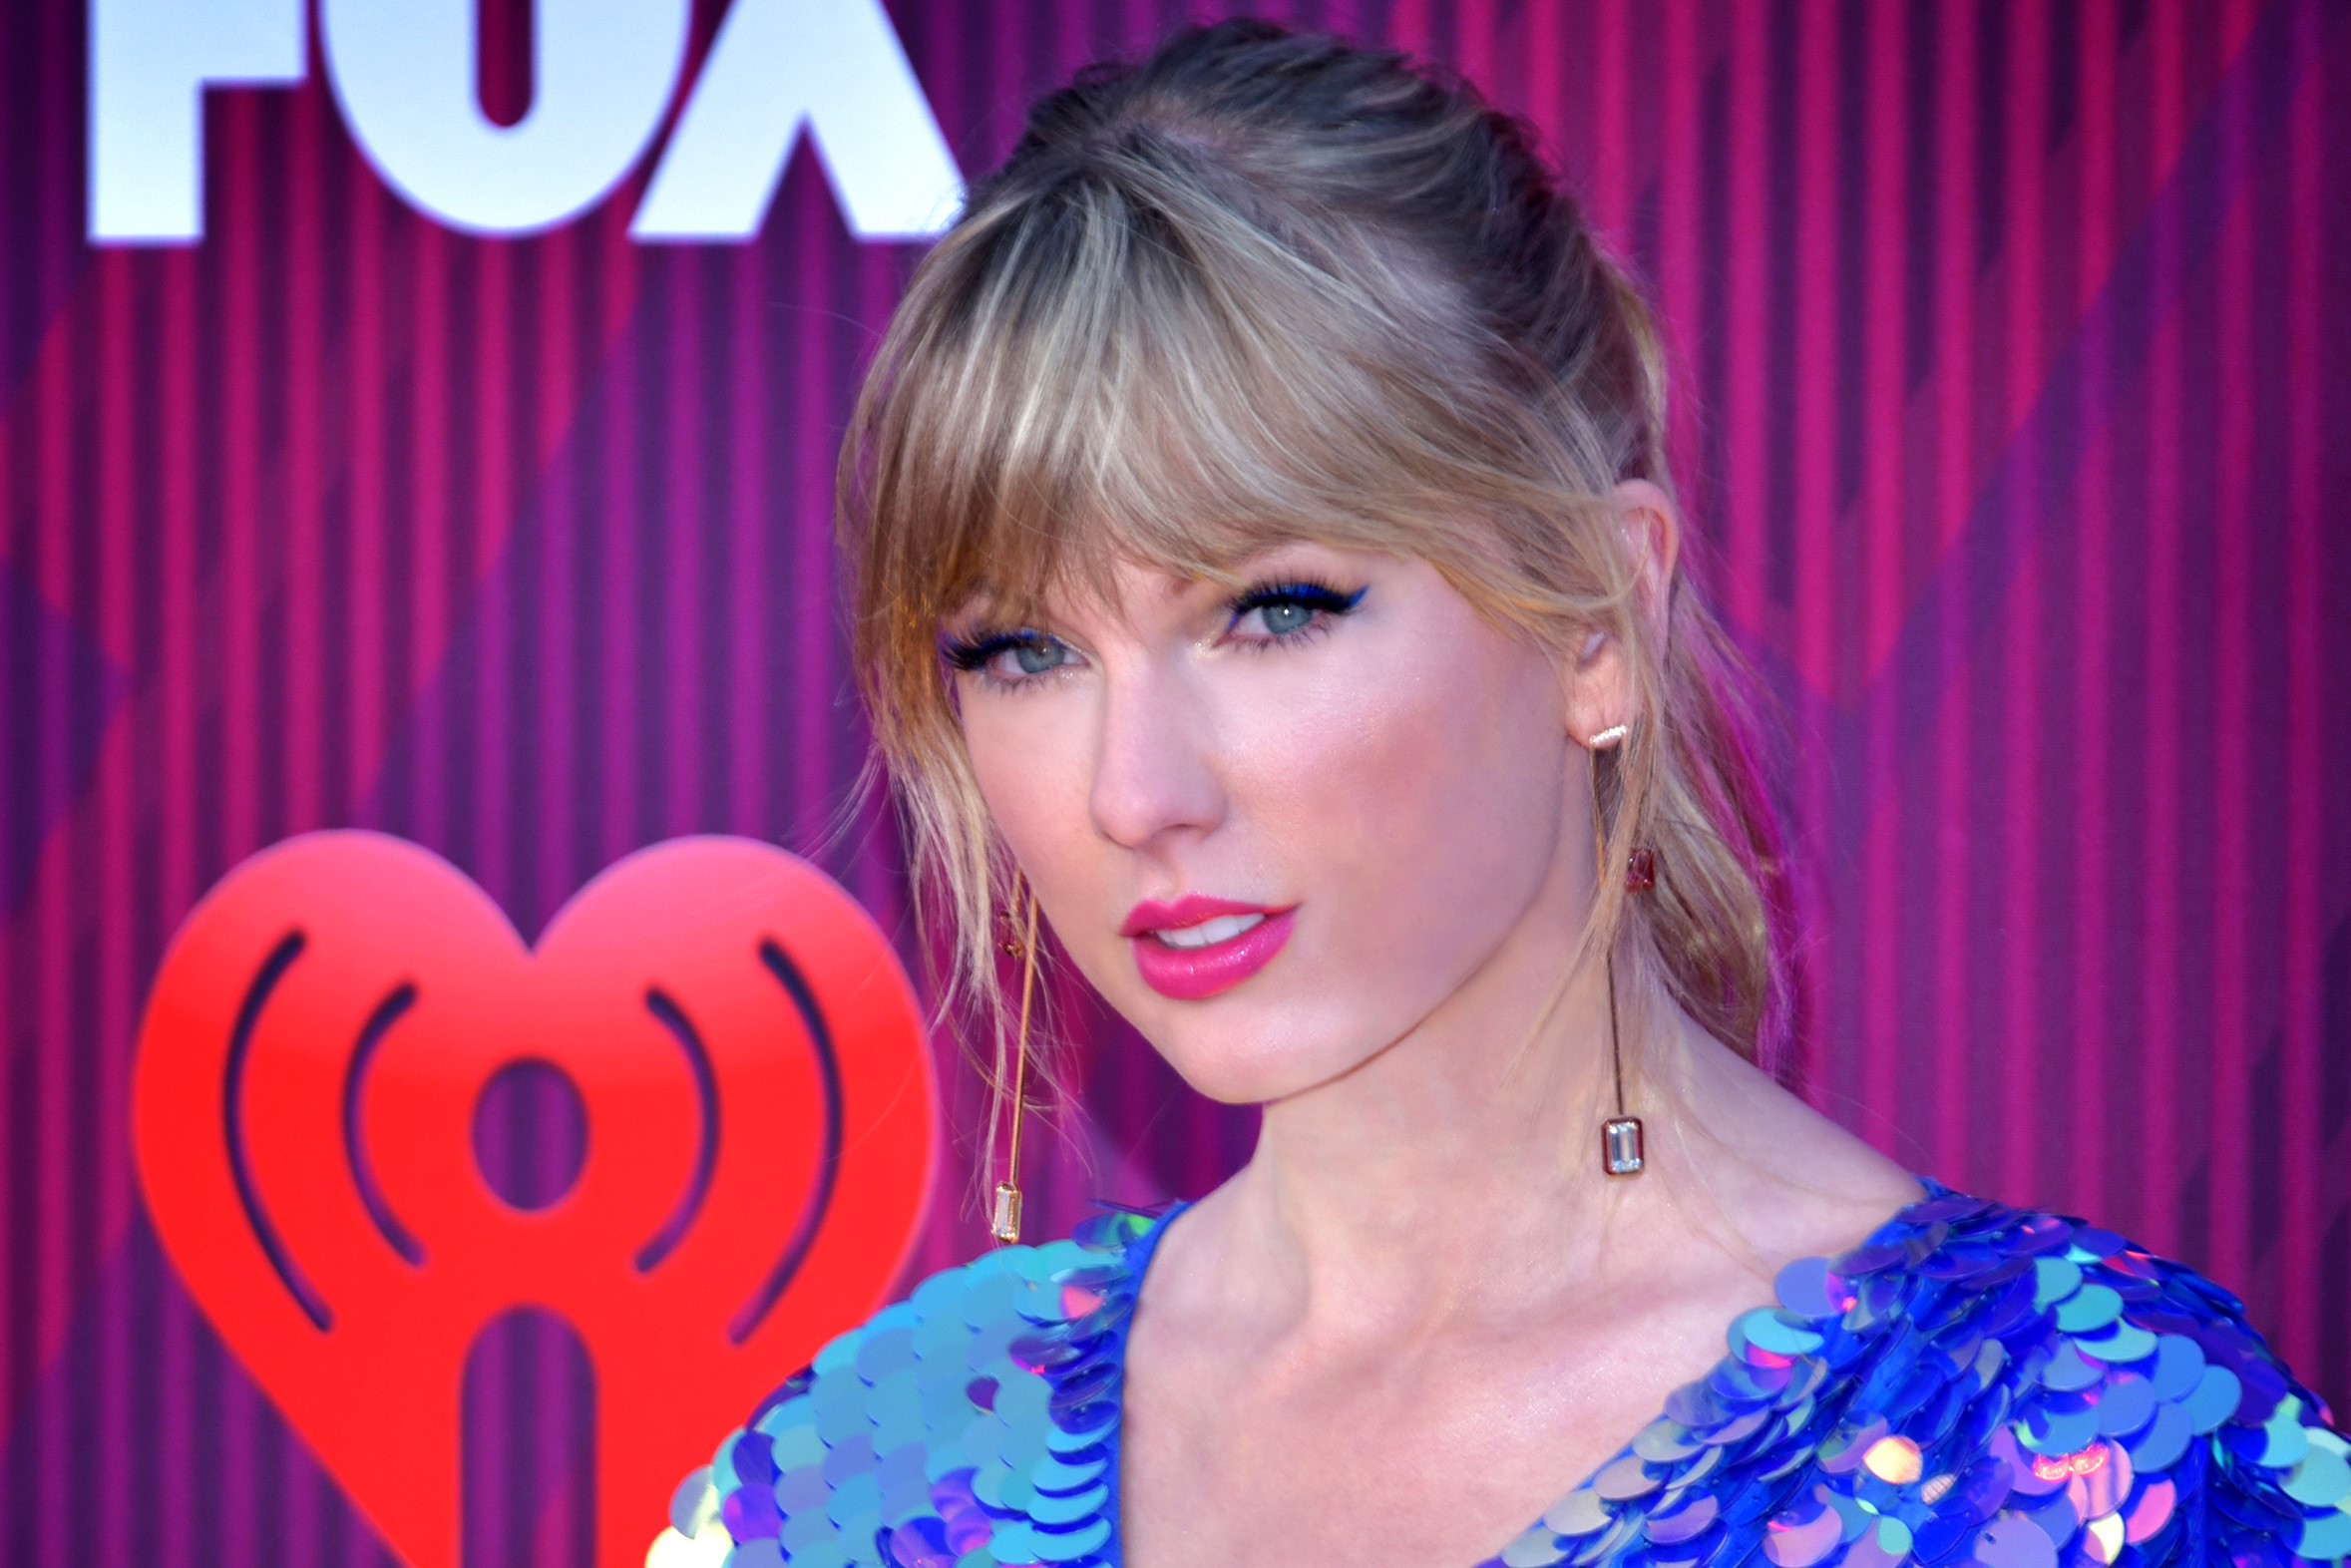 Indiana University to host Taylor Swift academic conference in November